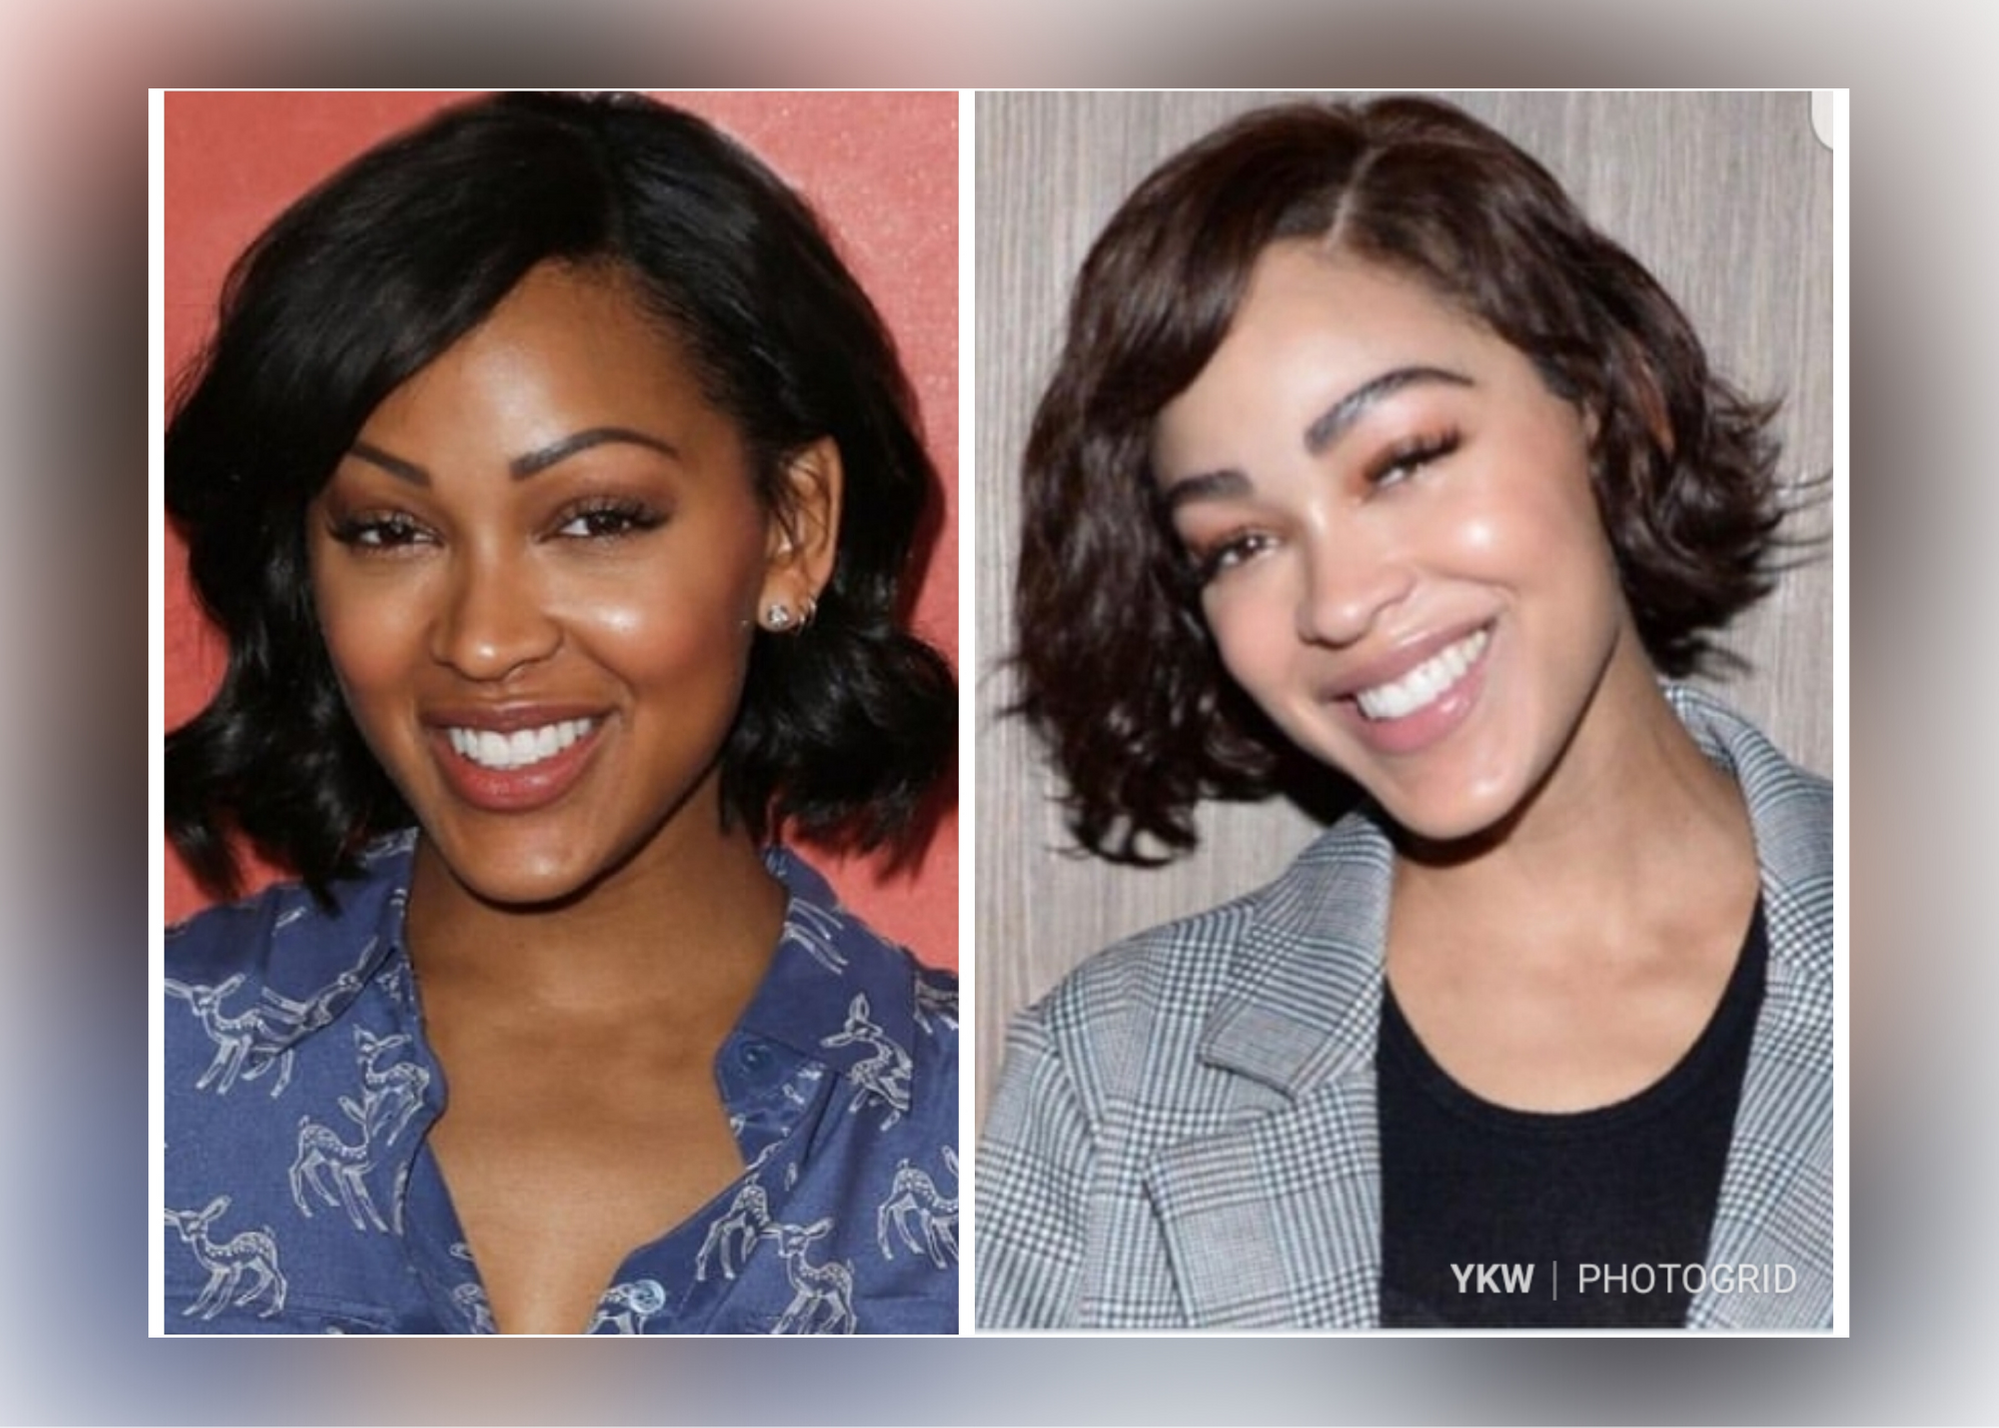 New Pics Have Folks Again Wondering If Meagan Good Bleaches Her Skin